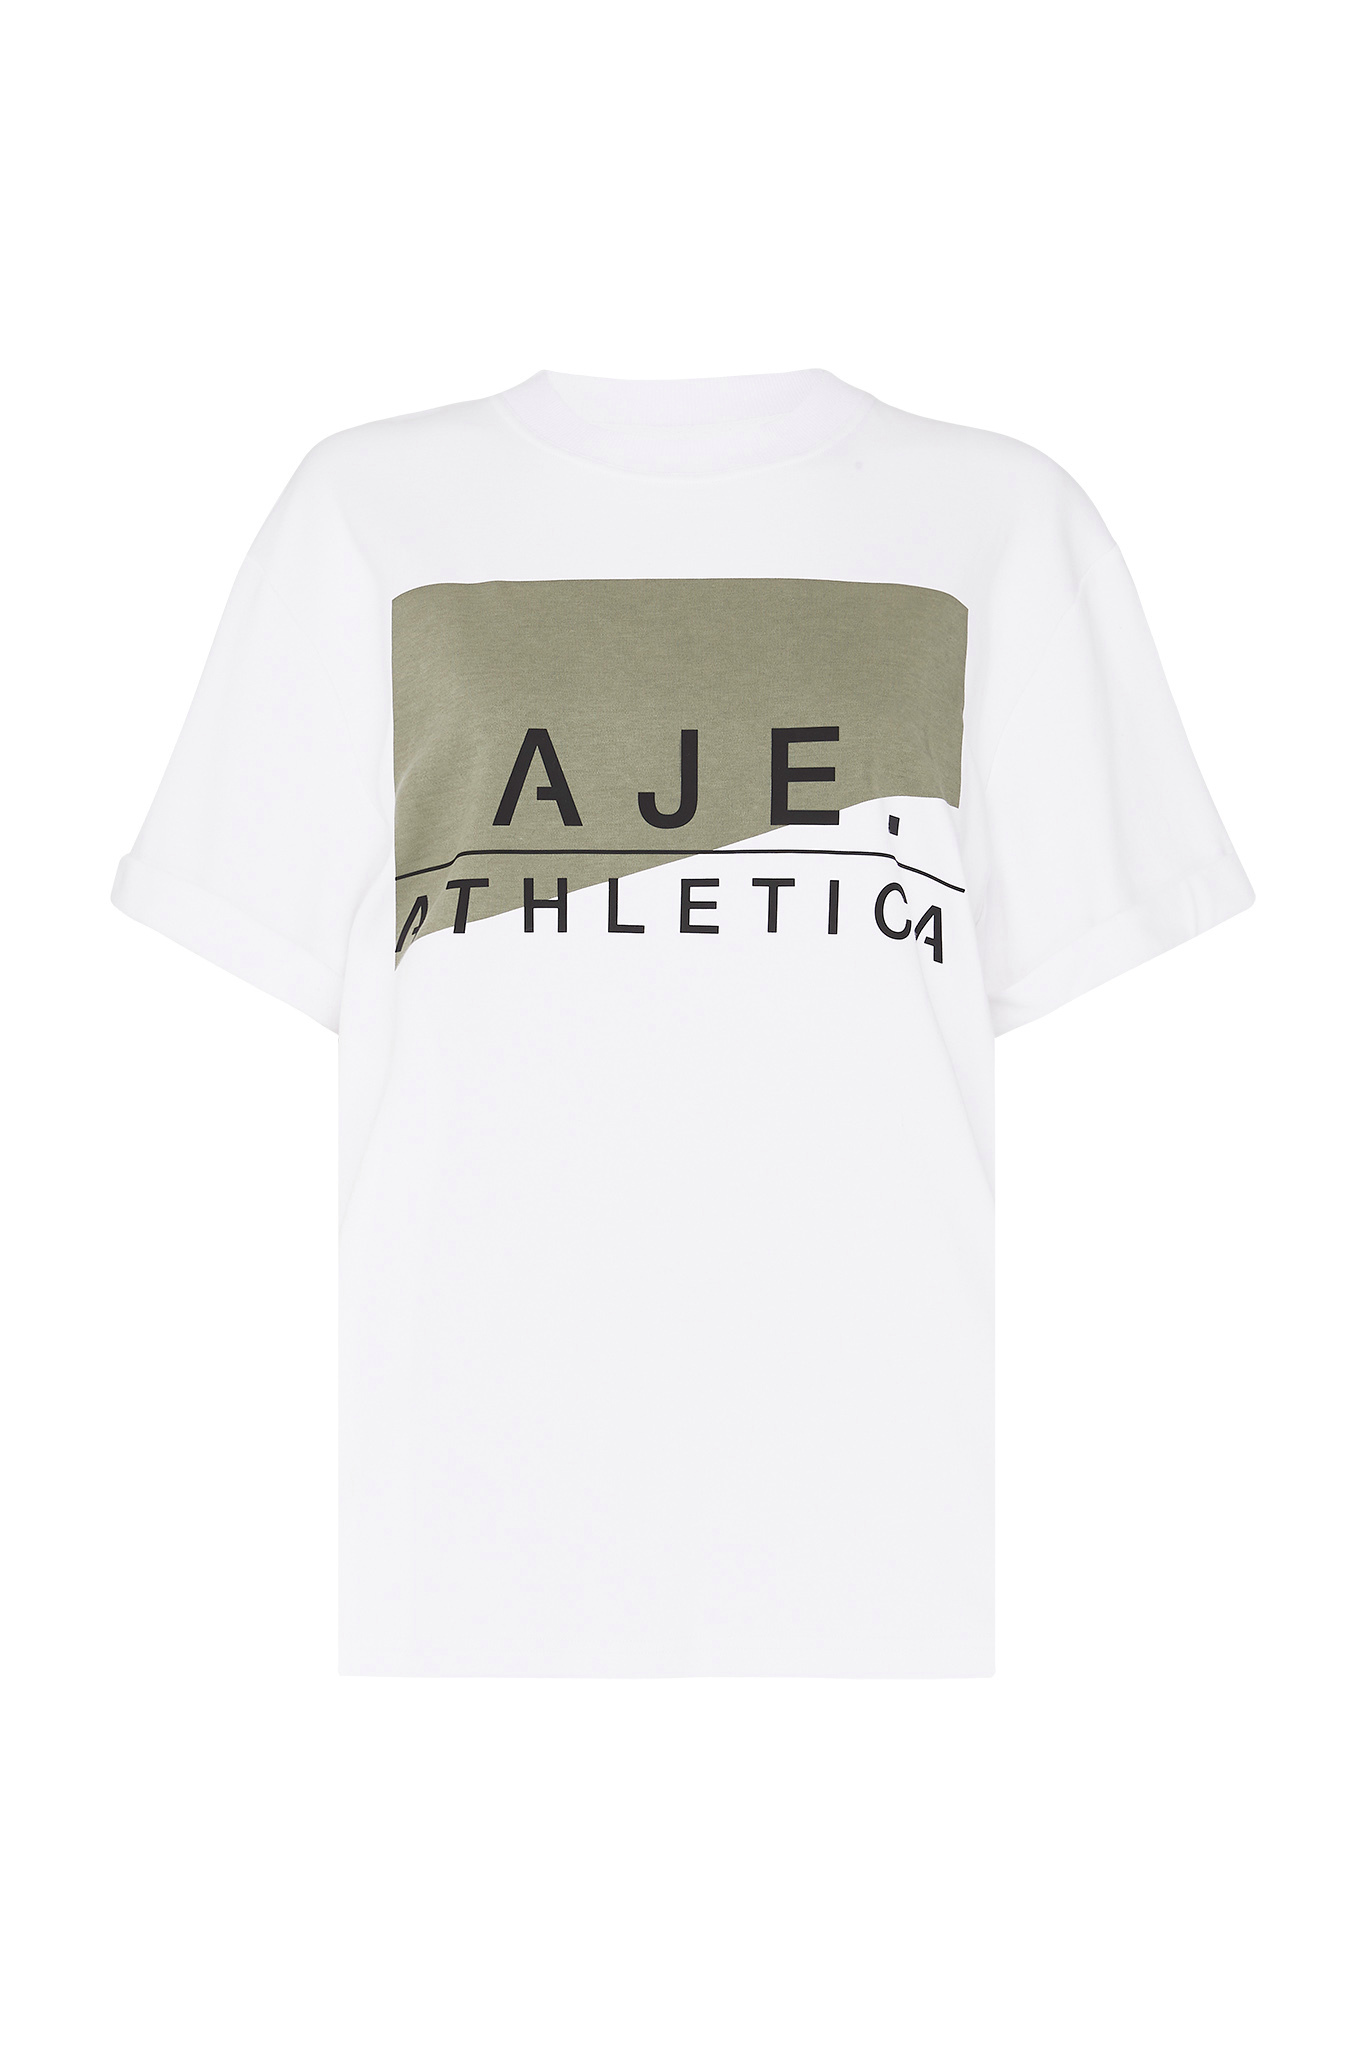 Aje Athletica Is Here To Elevate Your Activewear - Grazia